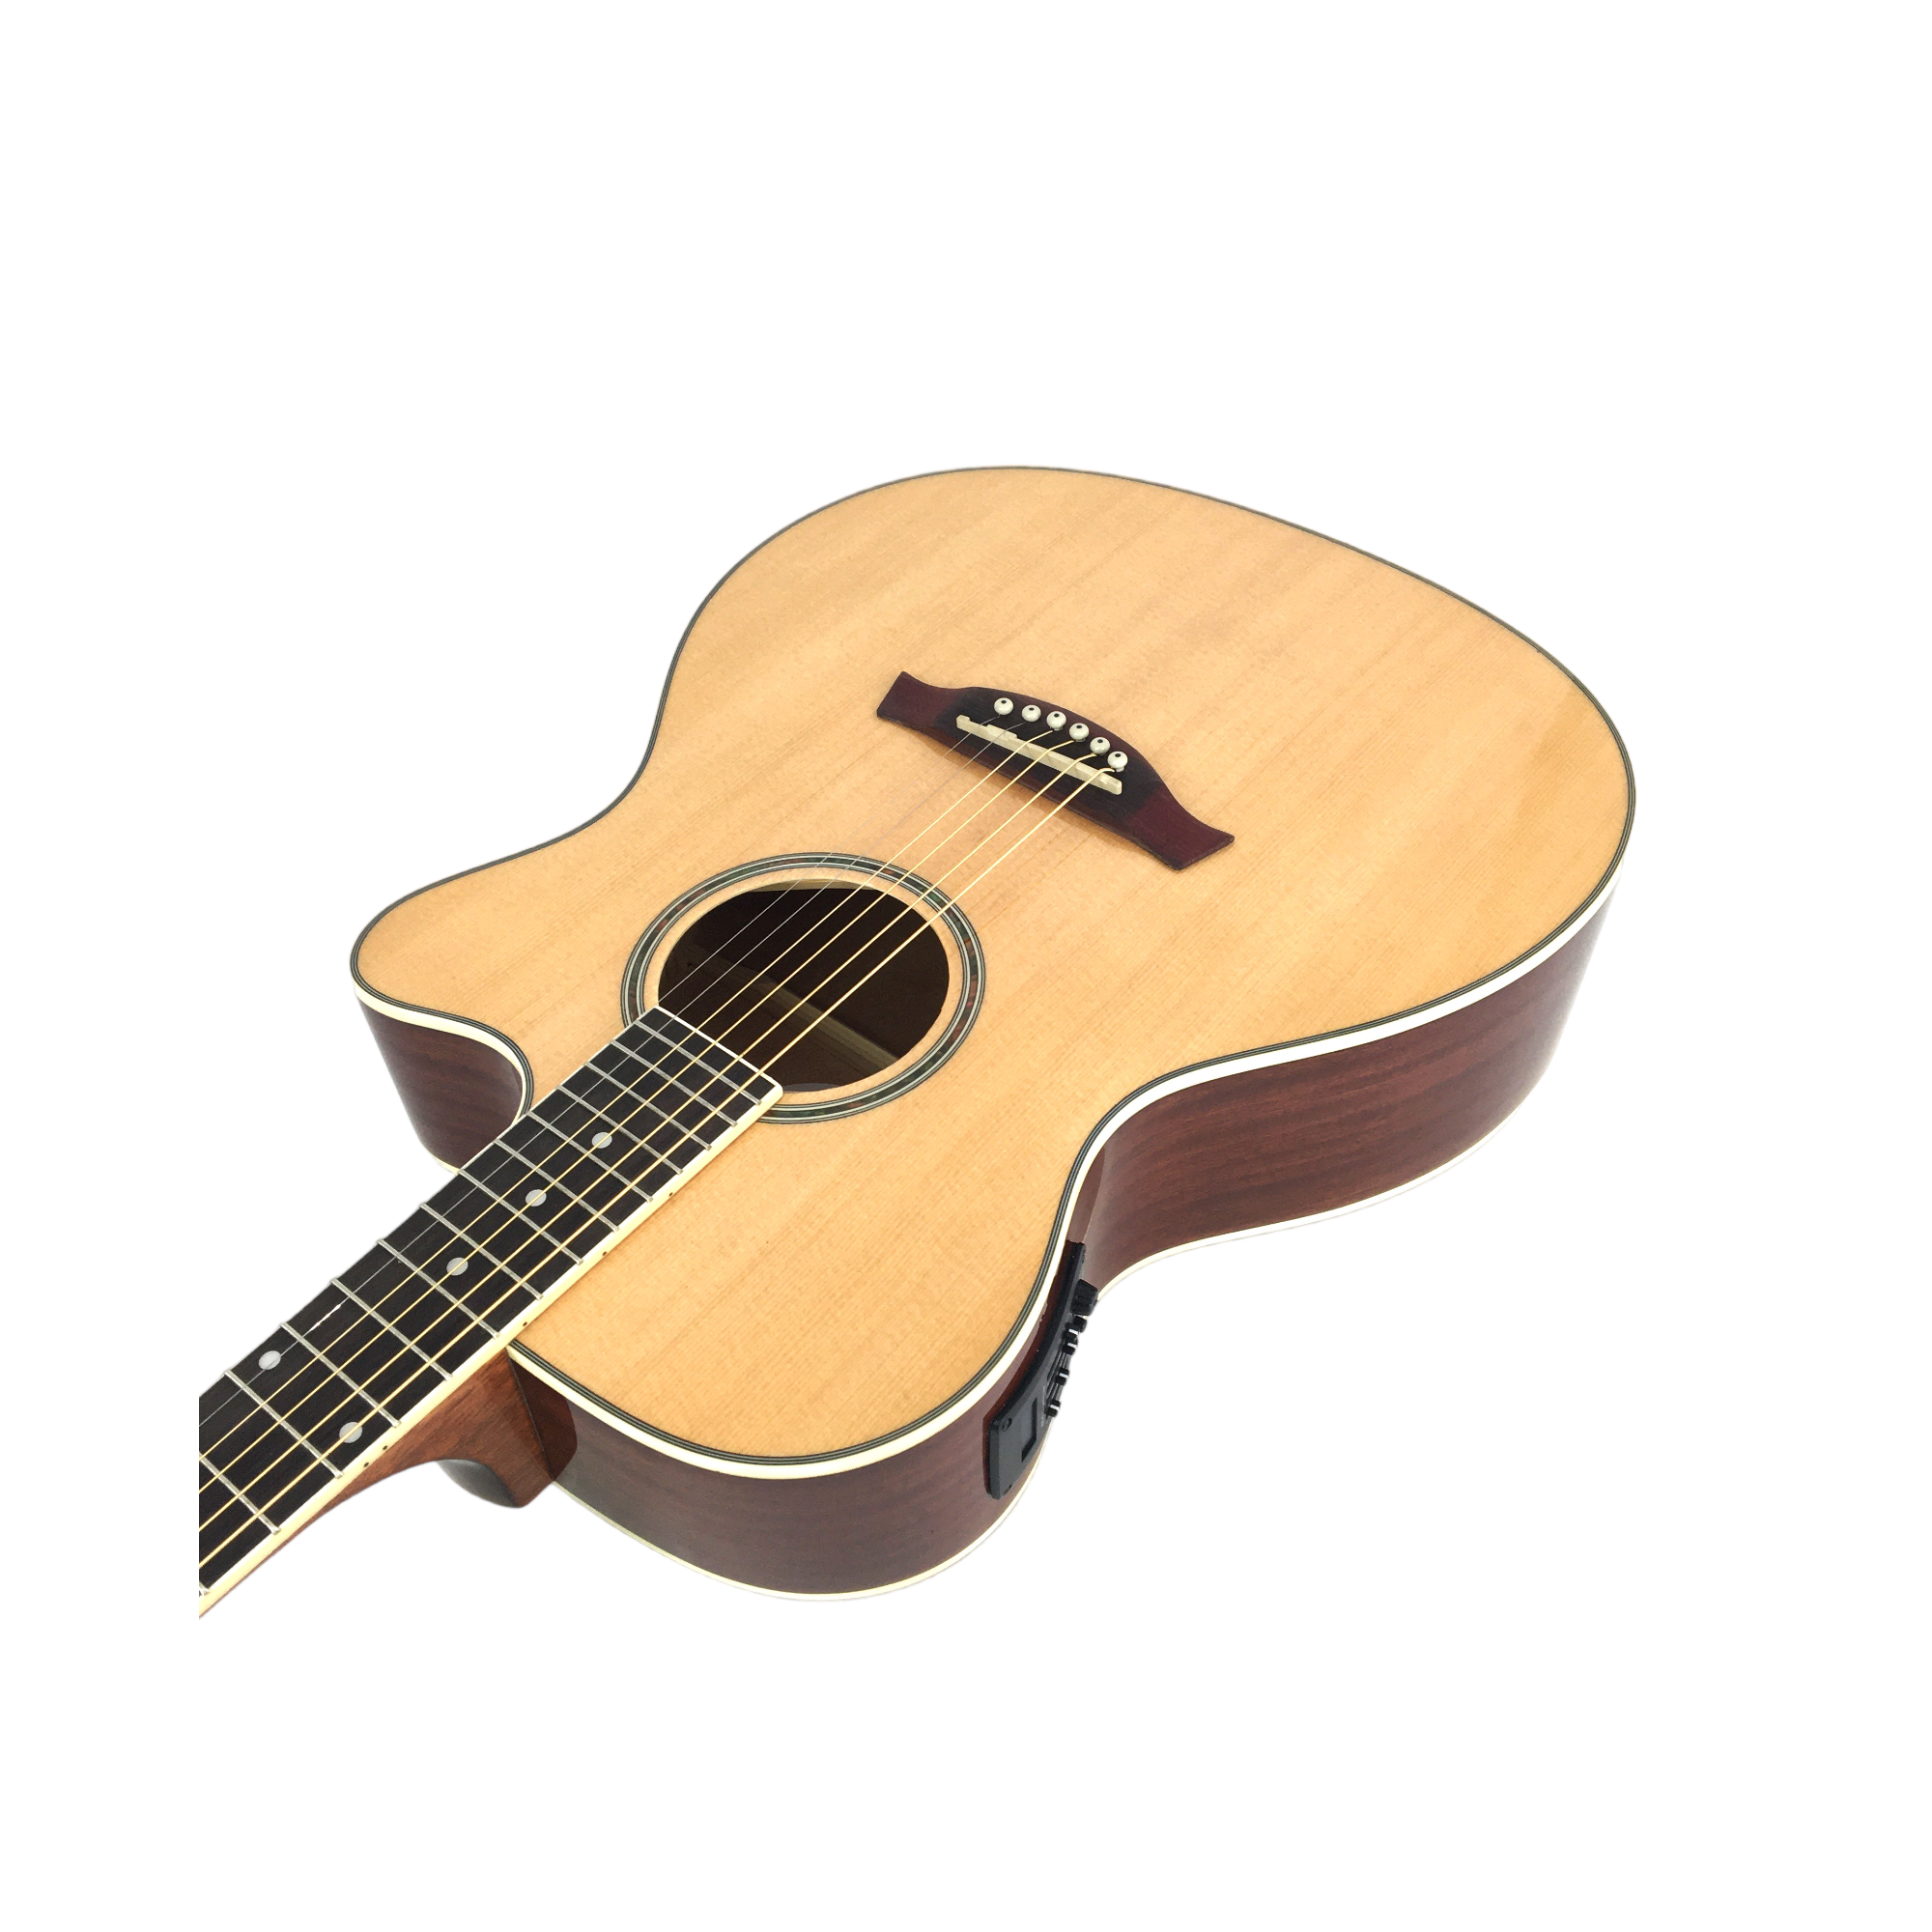 Enhanced Acoustic Experience: 40 Hs-gypsy-ceq/gc OM Type Guitar With  Built-in EQ, Cutaway Design, Includes Free Bag and More 